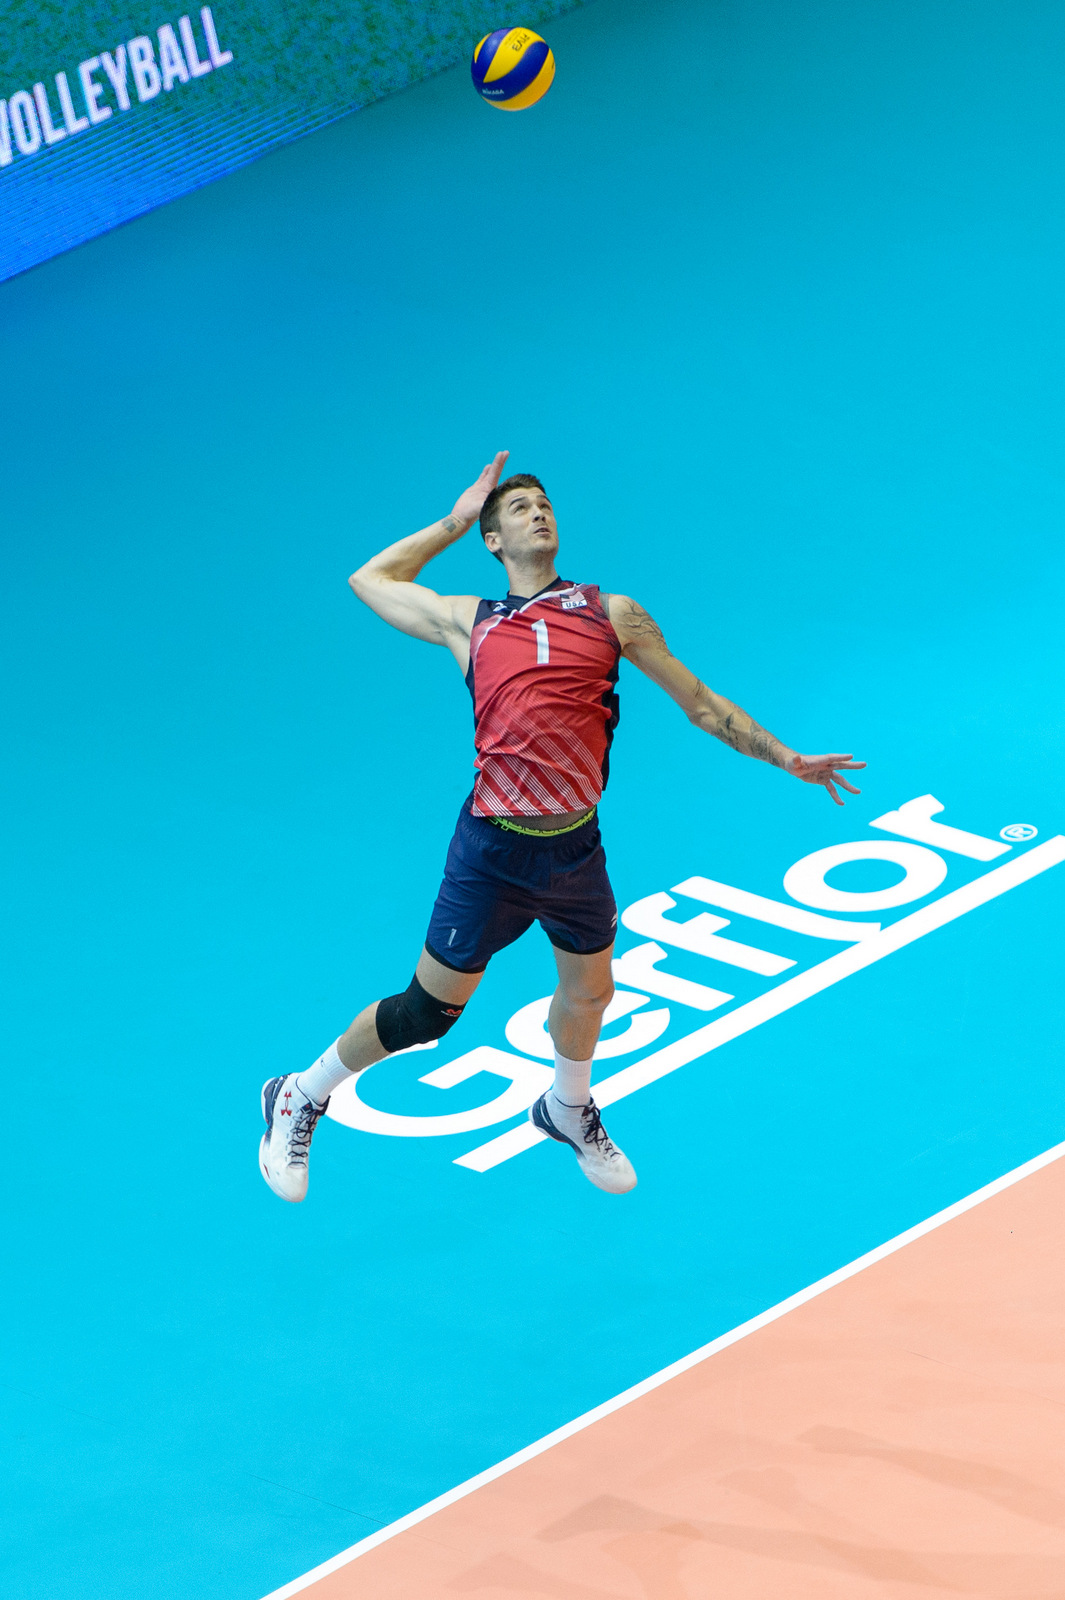 USA's Matthew Anderson (1) serves during a FIVB Men's Volleyball World League match between the USA and Bulgaria in Dallas, Texas.